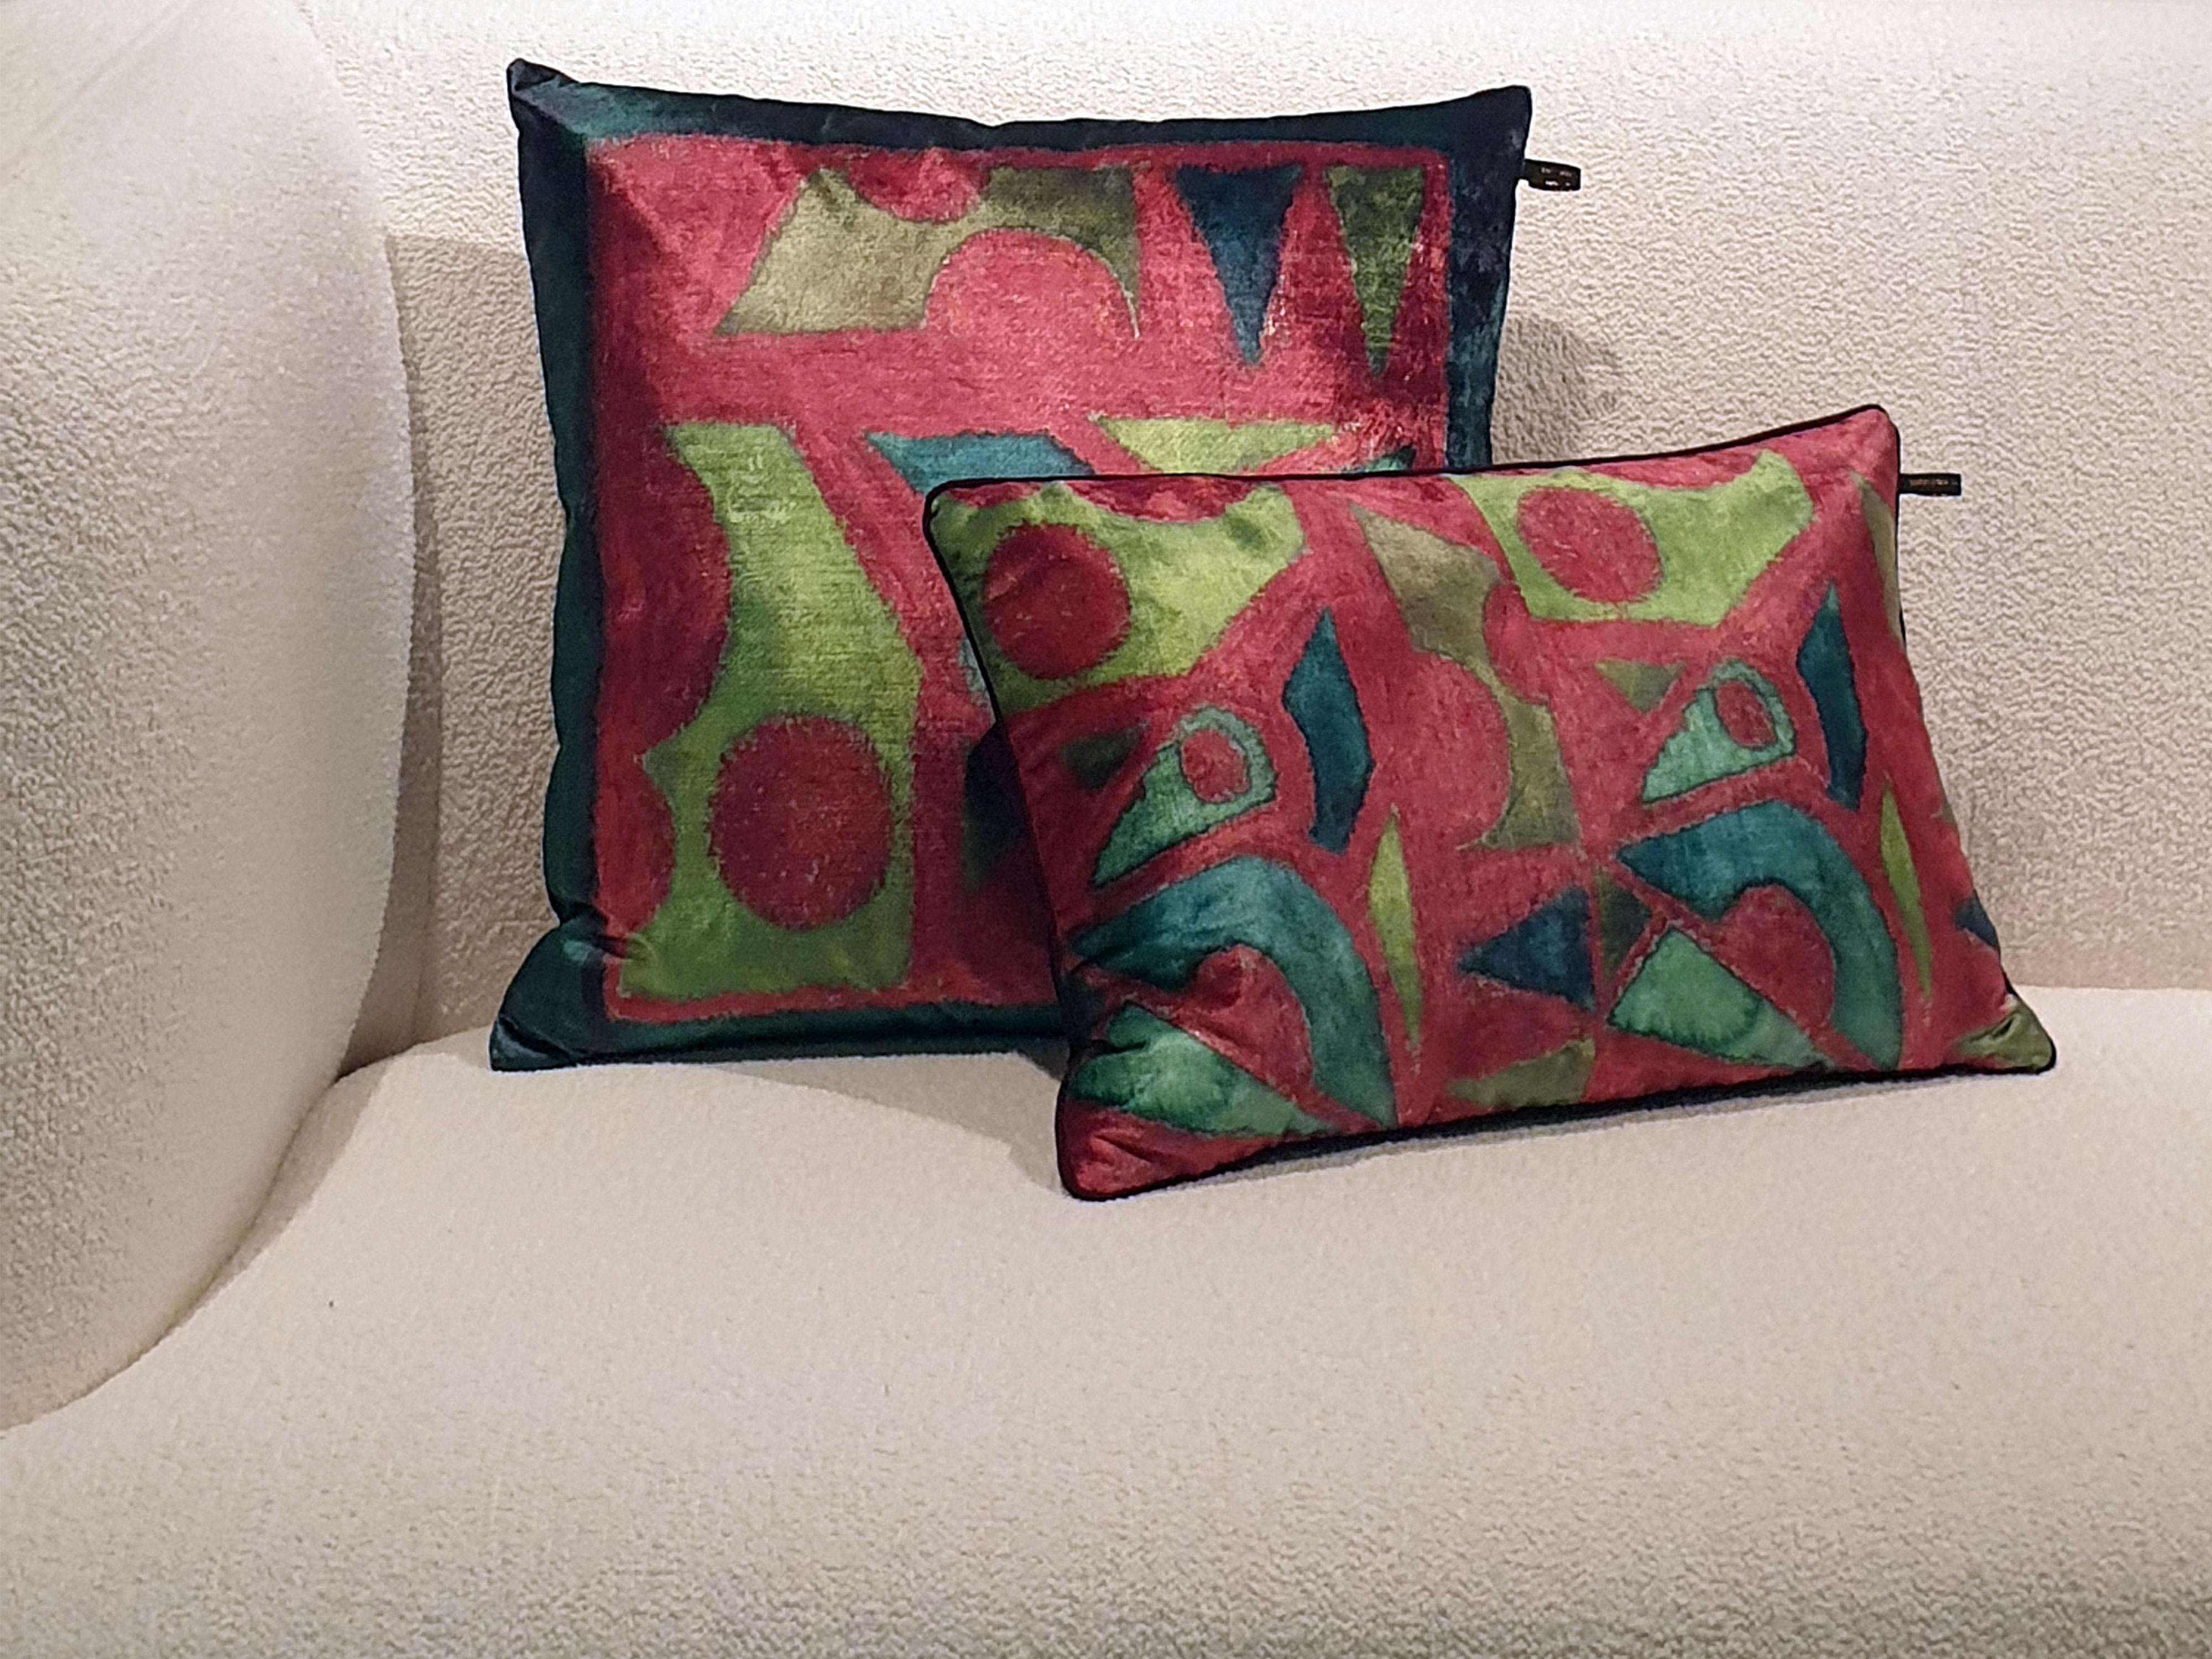 Chantal Keizer painted a number of ART works 
and transferred them to fabric in a limited collection. 
Of each work a maximum of 50 cushions 
are available worldwide.

The colours are deep greens and metallics, the backside is ruby red.

This